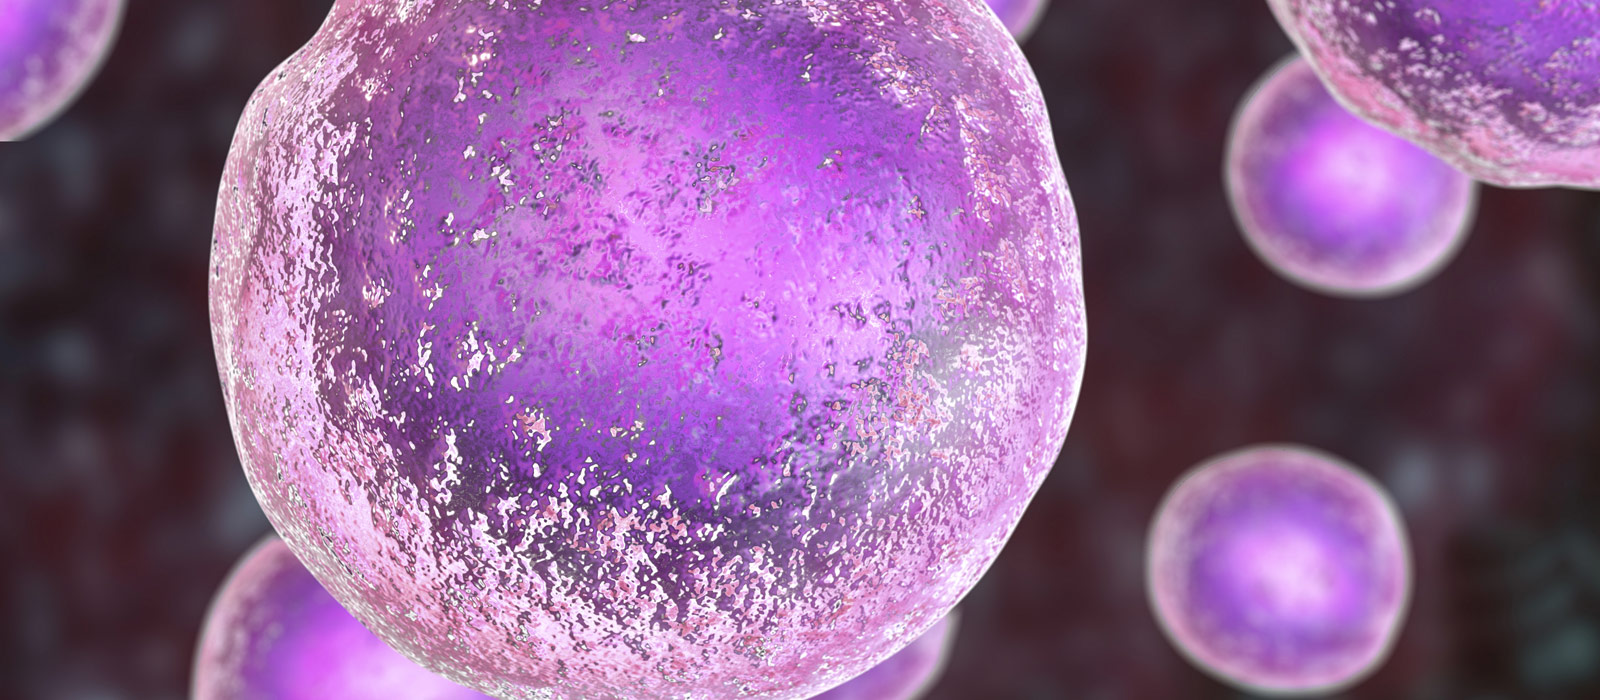 Keeping Embryonic Stem Cells Pluripotent